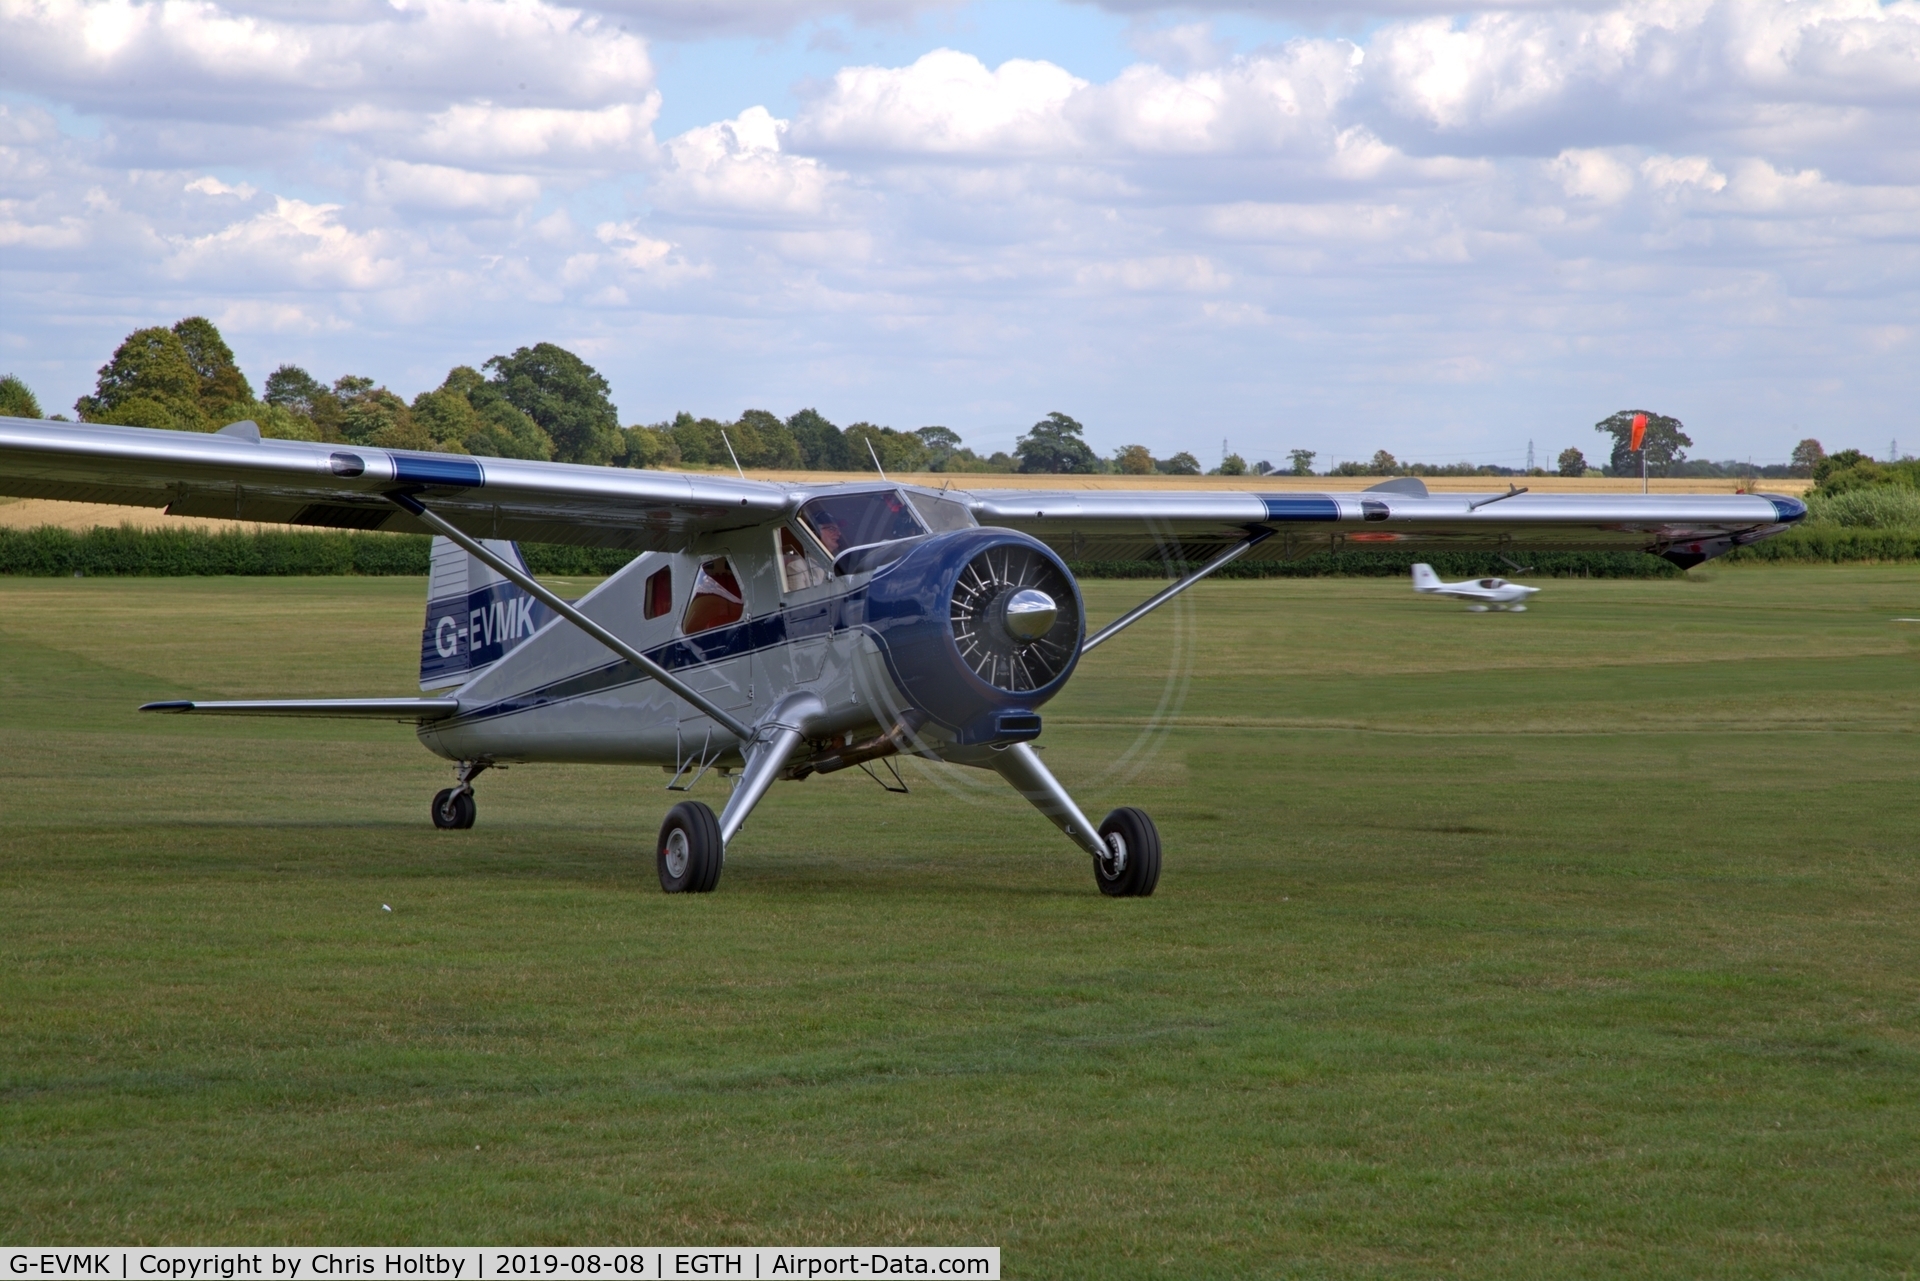 G-EVMK, 1953 De Havilland Canada U-6A Beaver C/N 672, 1953 Beaver taxiing to park at the Gathering of Moths 2019 at Old Warden